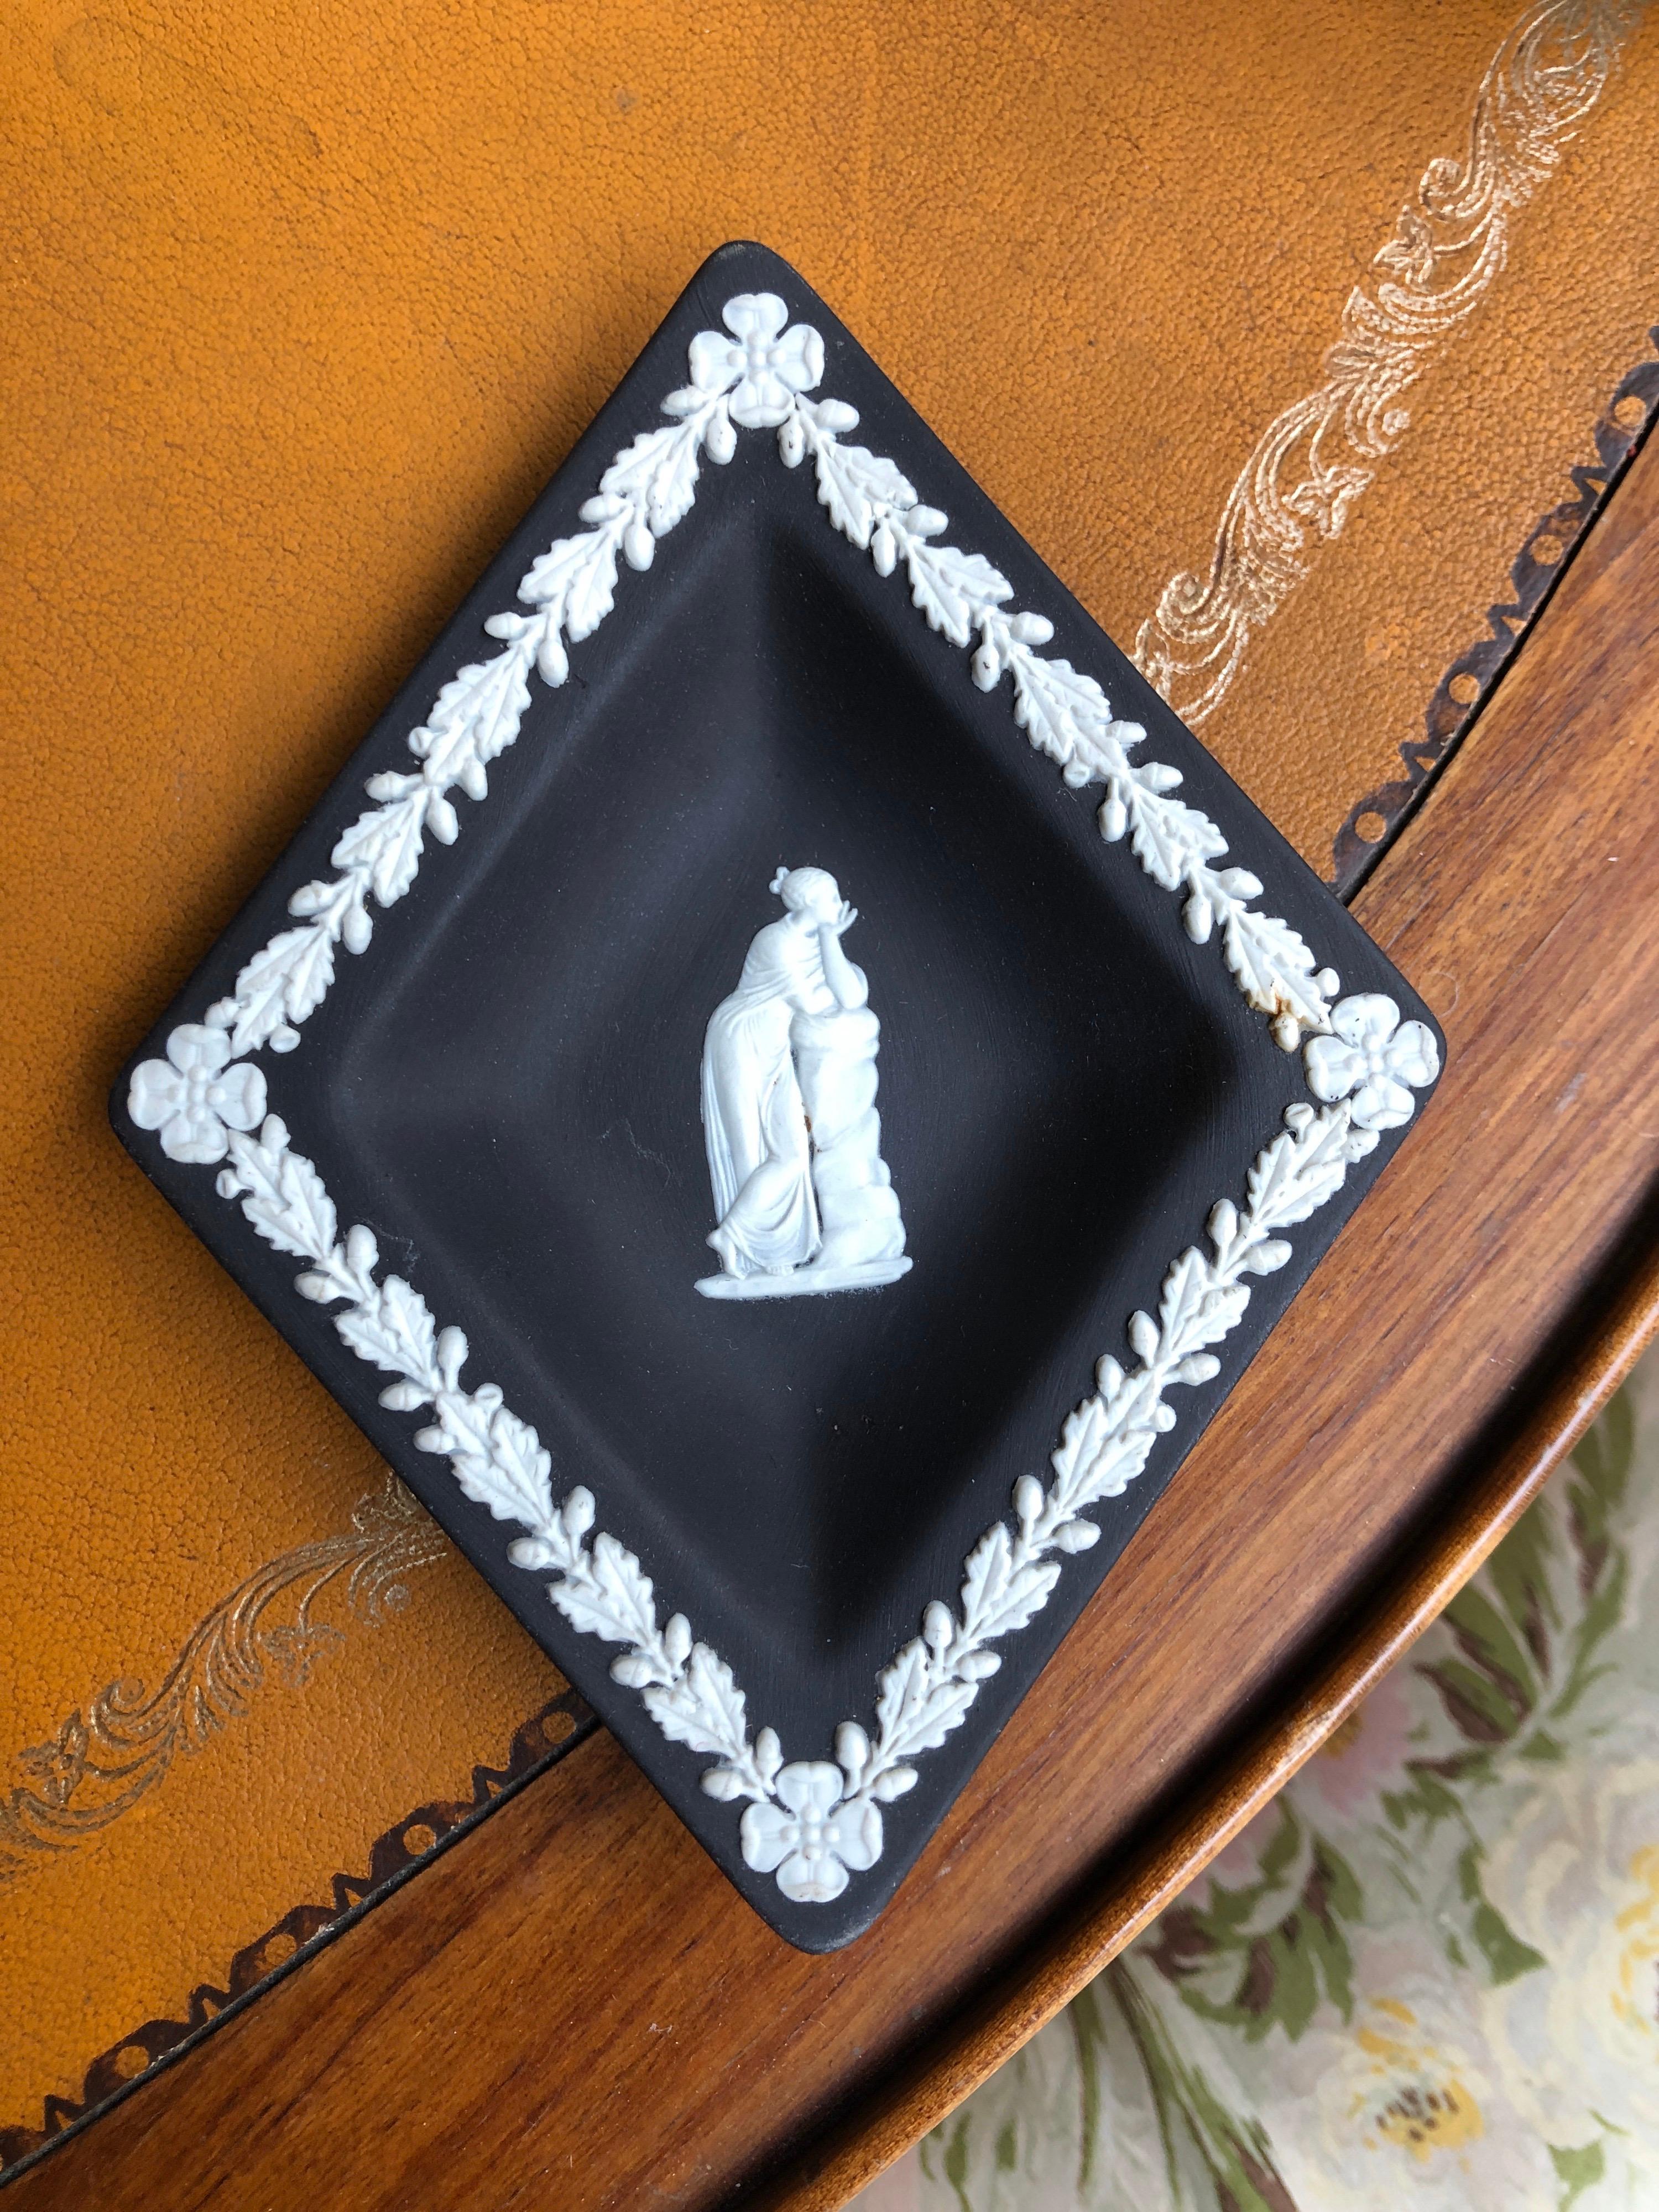 Antique Wedgwood vide poche or pin tray in black basalt in perfect condition.
England, circa 1960.